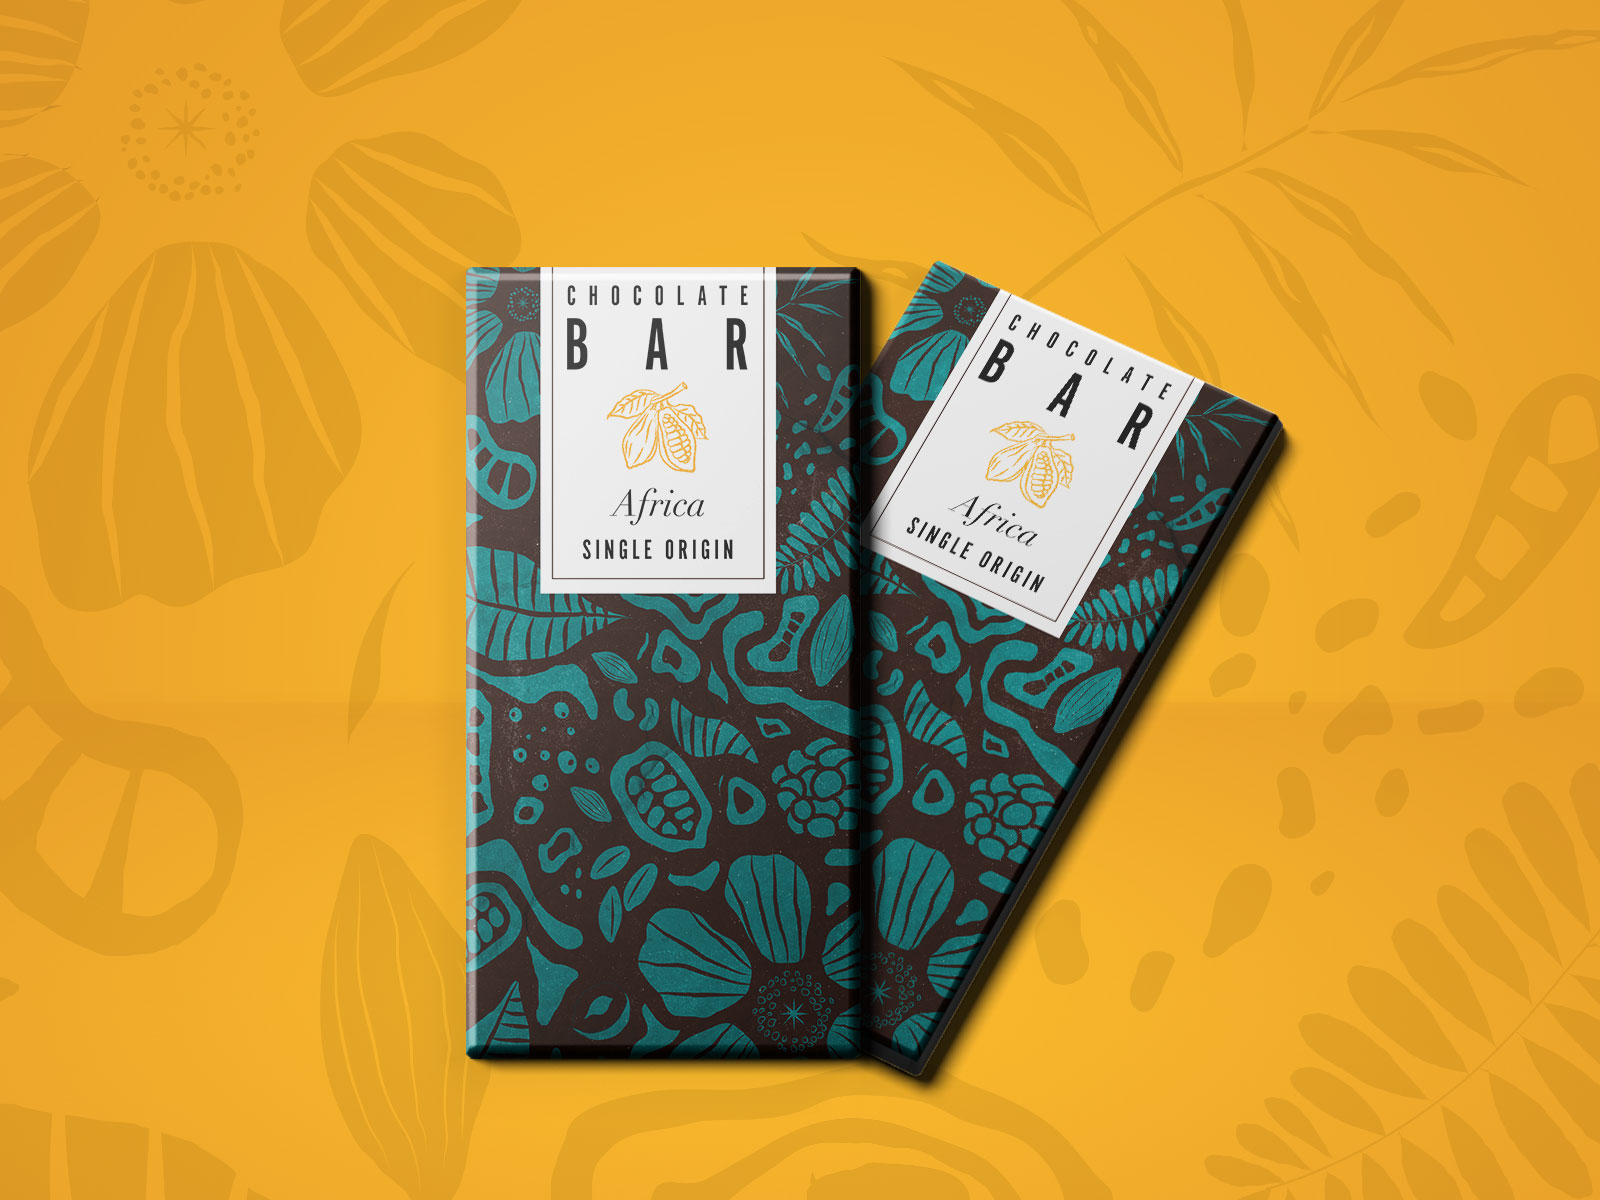 chocolate bar wrappers design